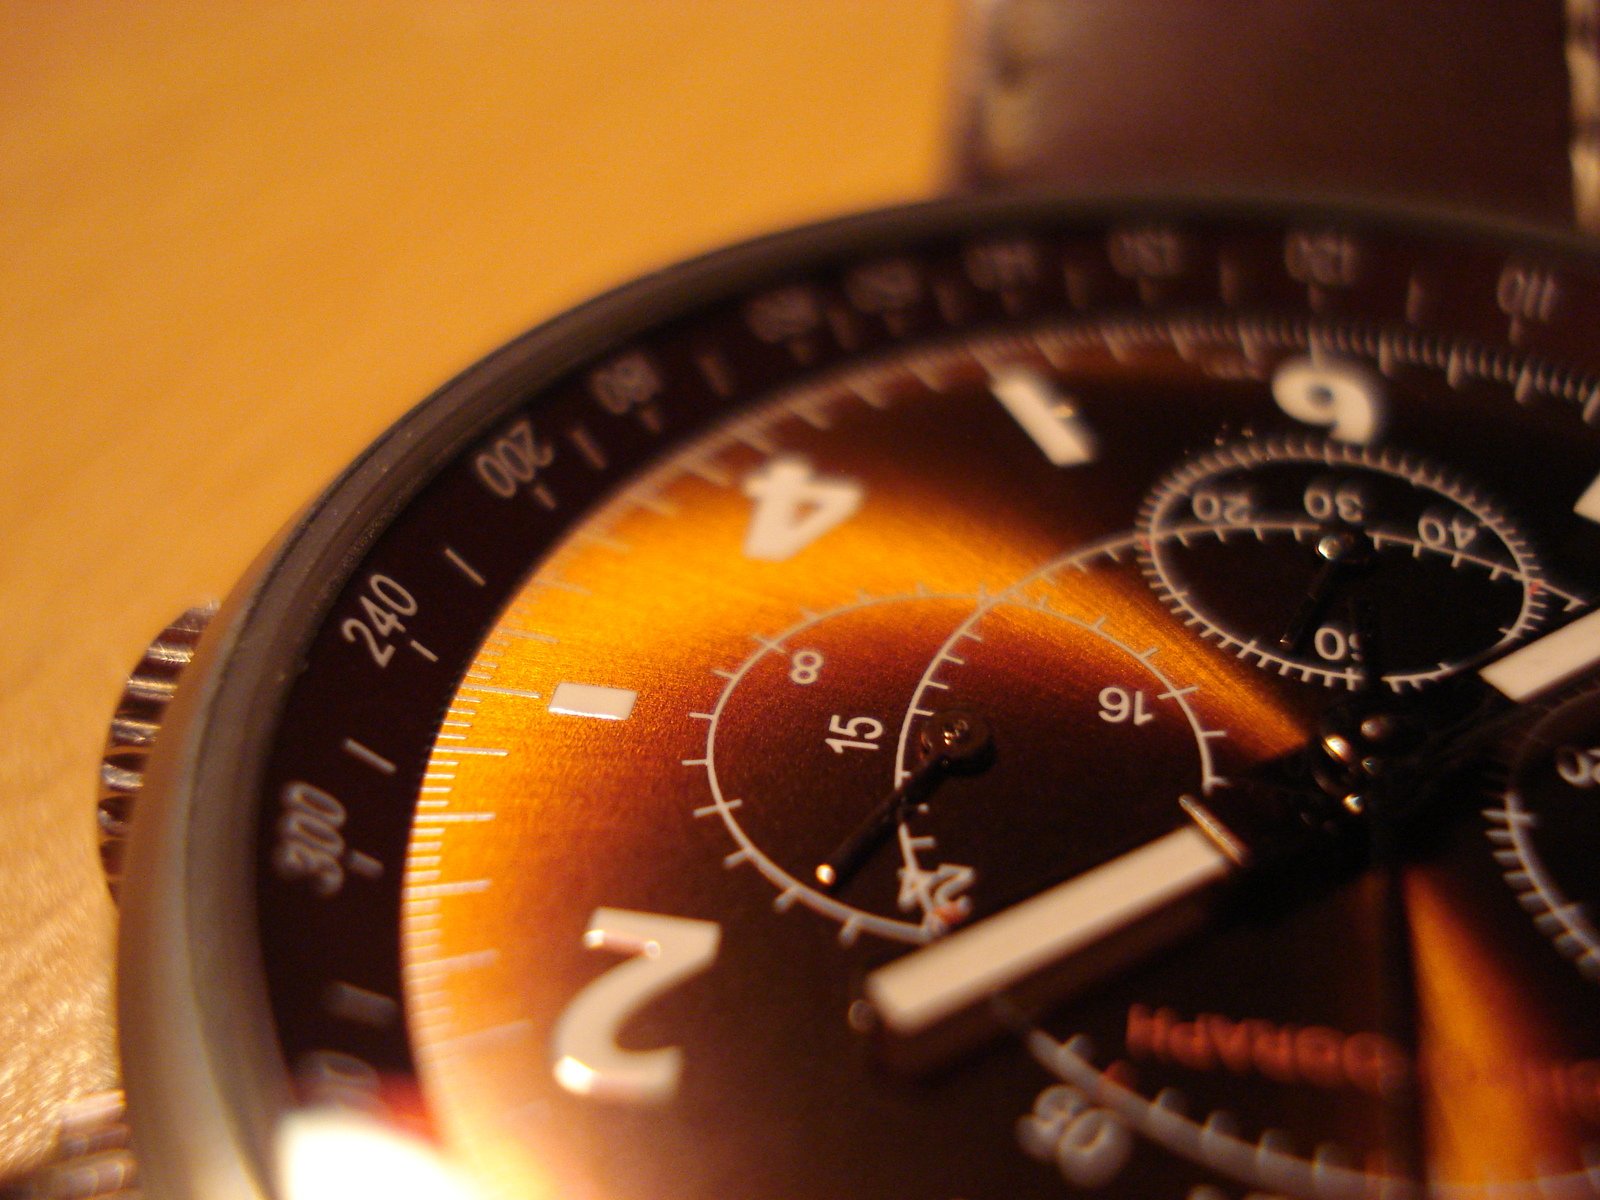 a close up s of an analog watch